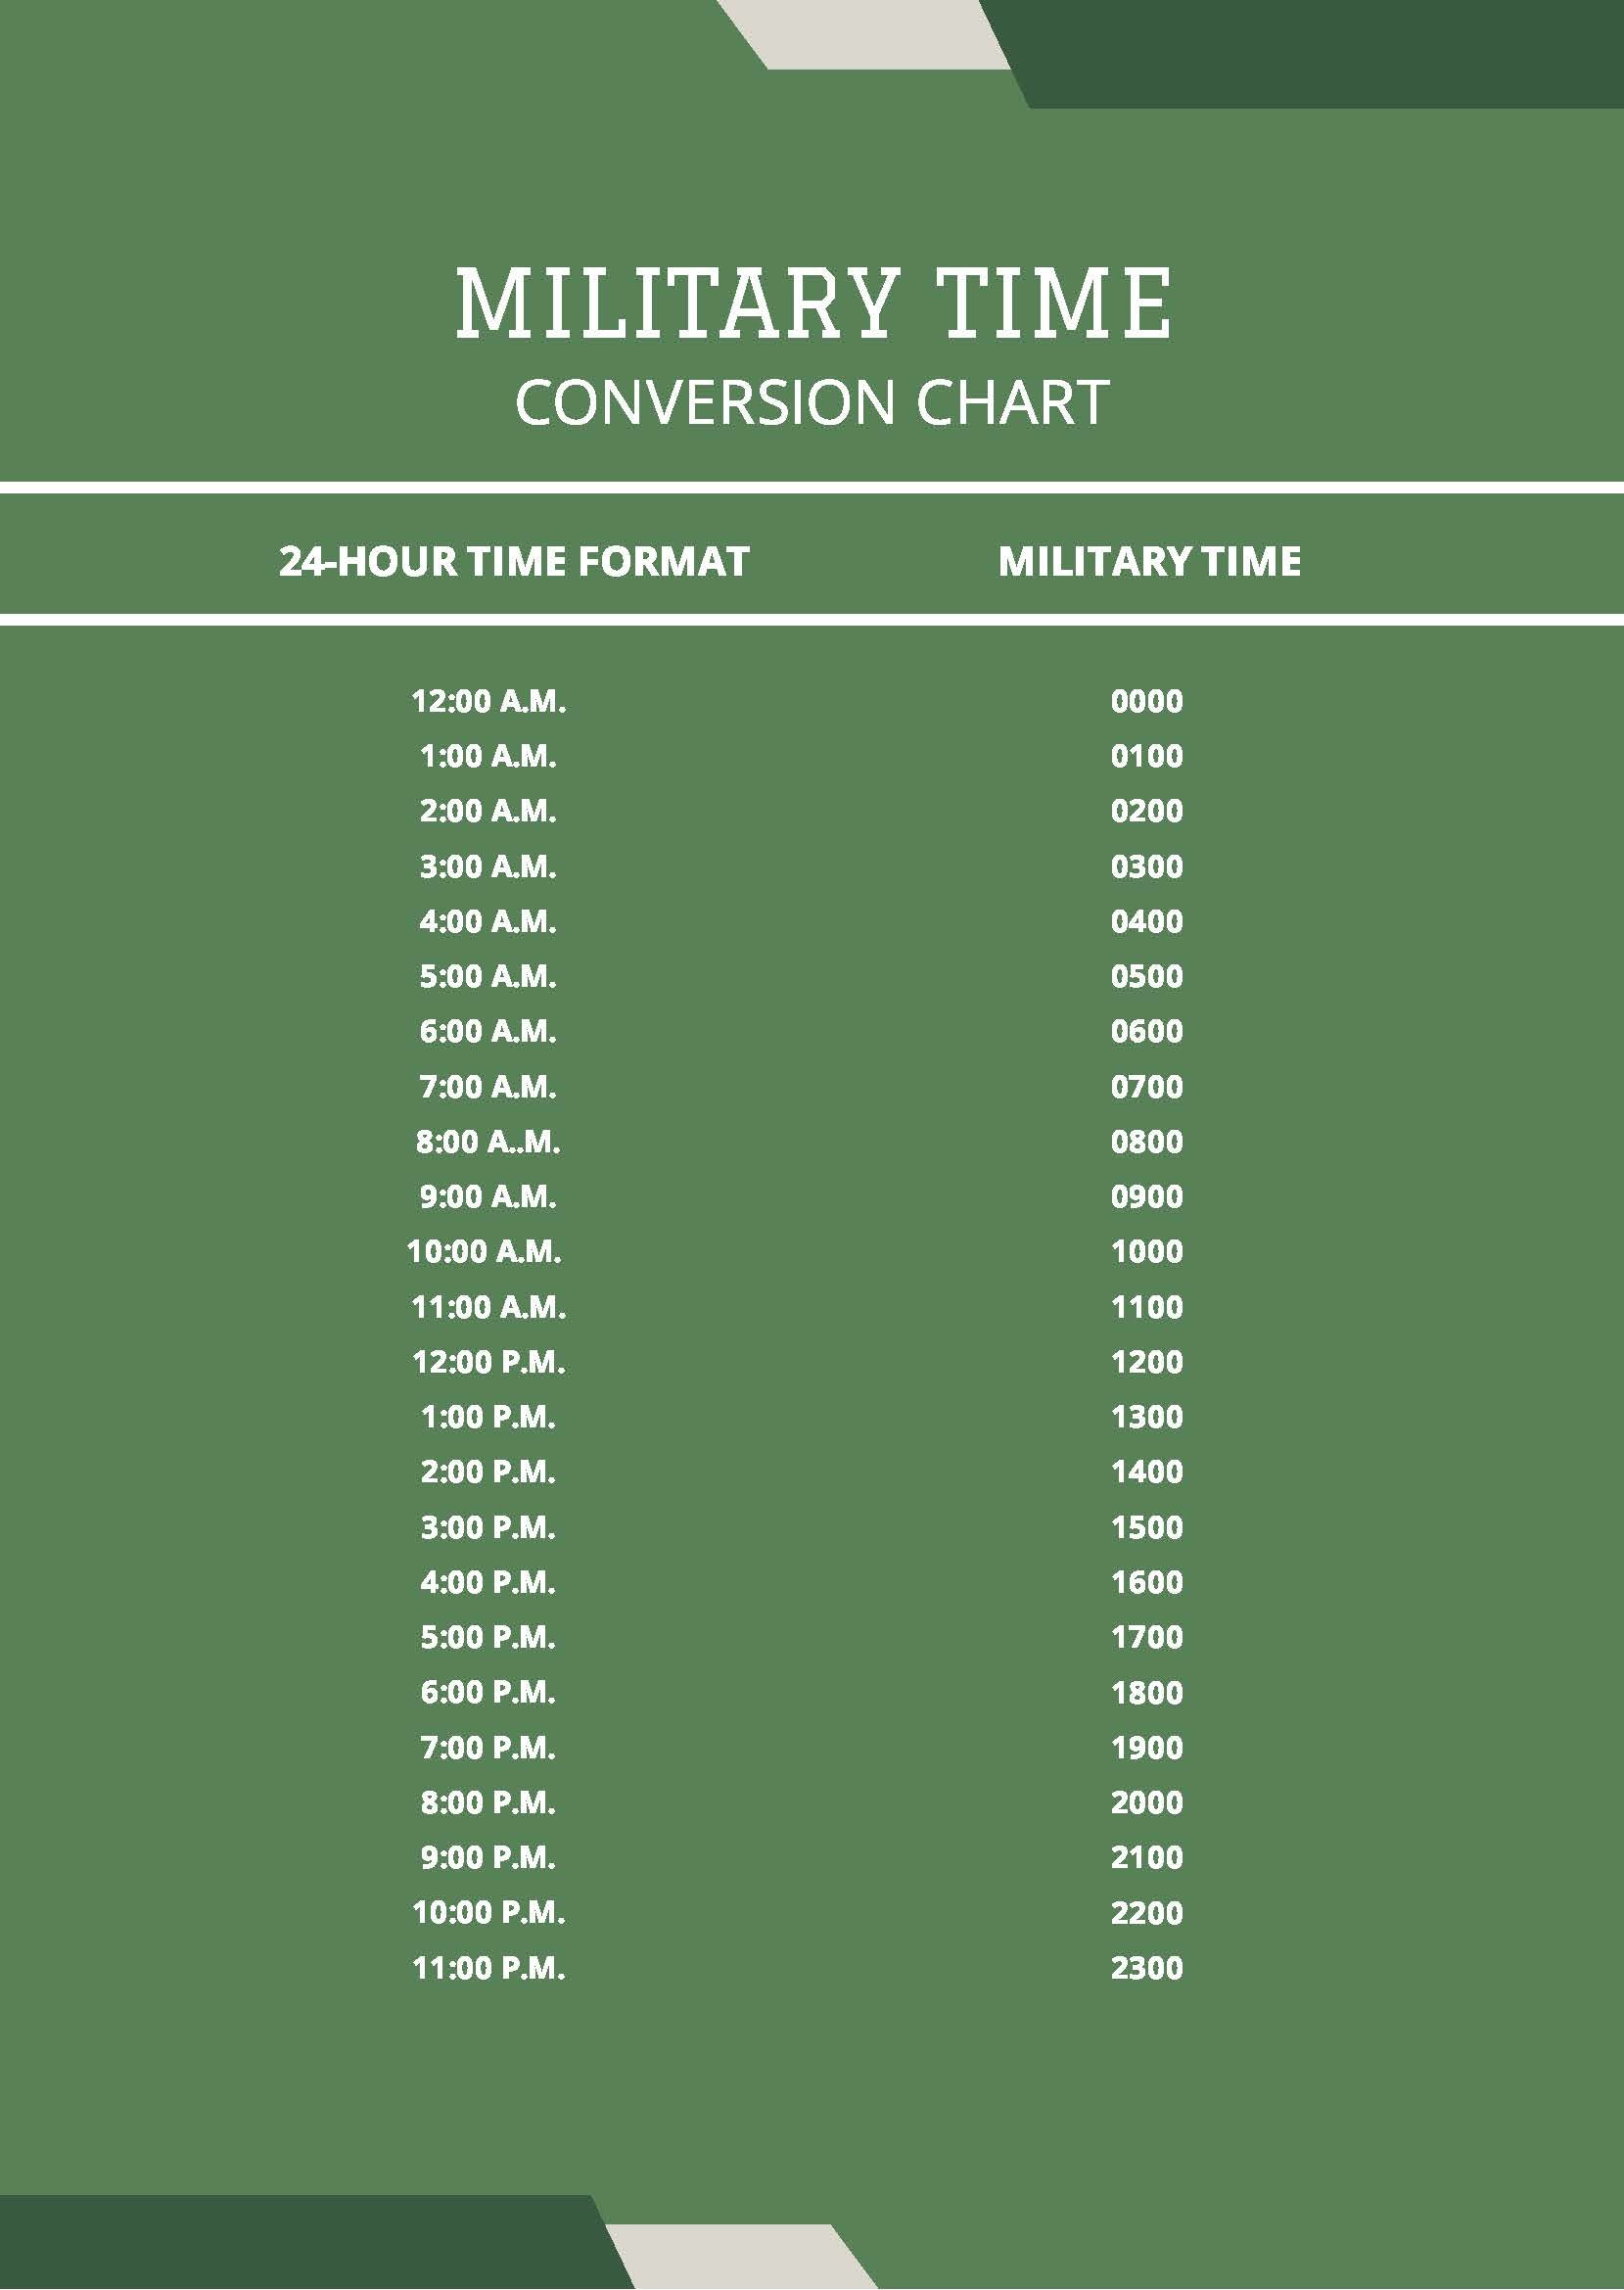 Military Time Conversion Chart in PDF Download